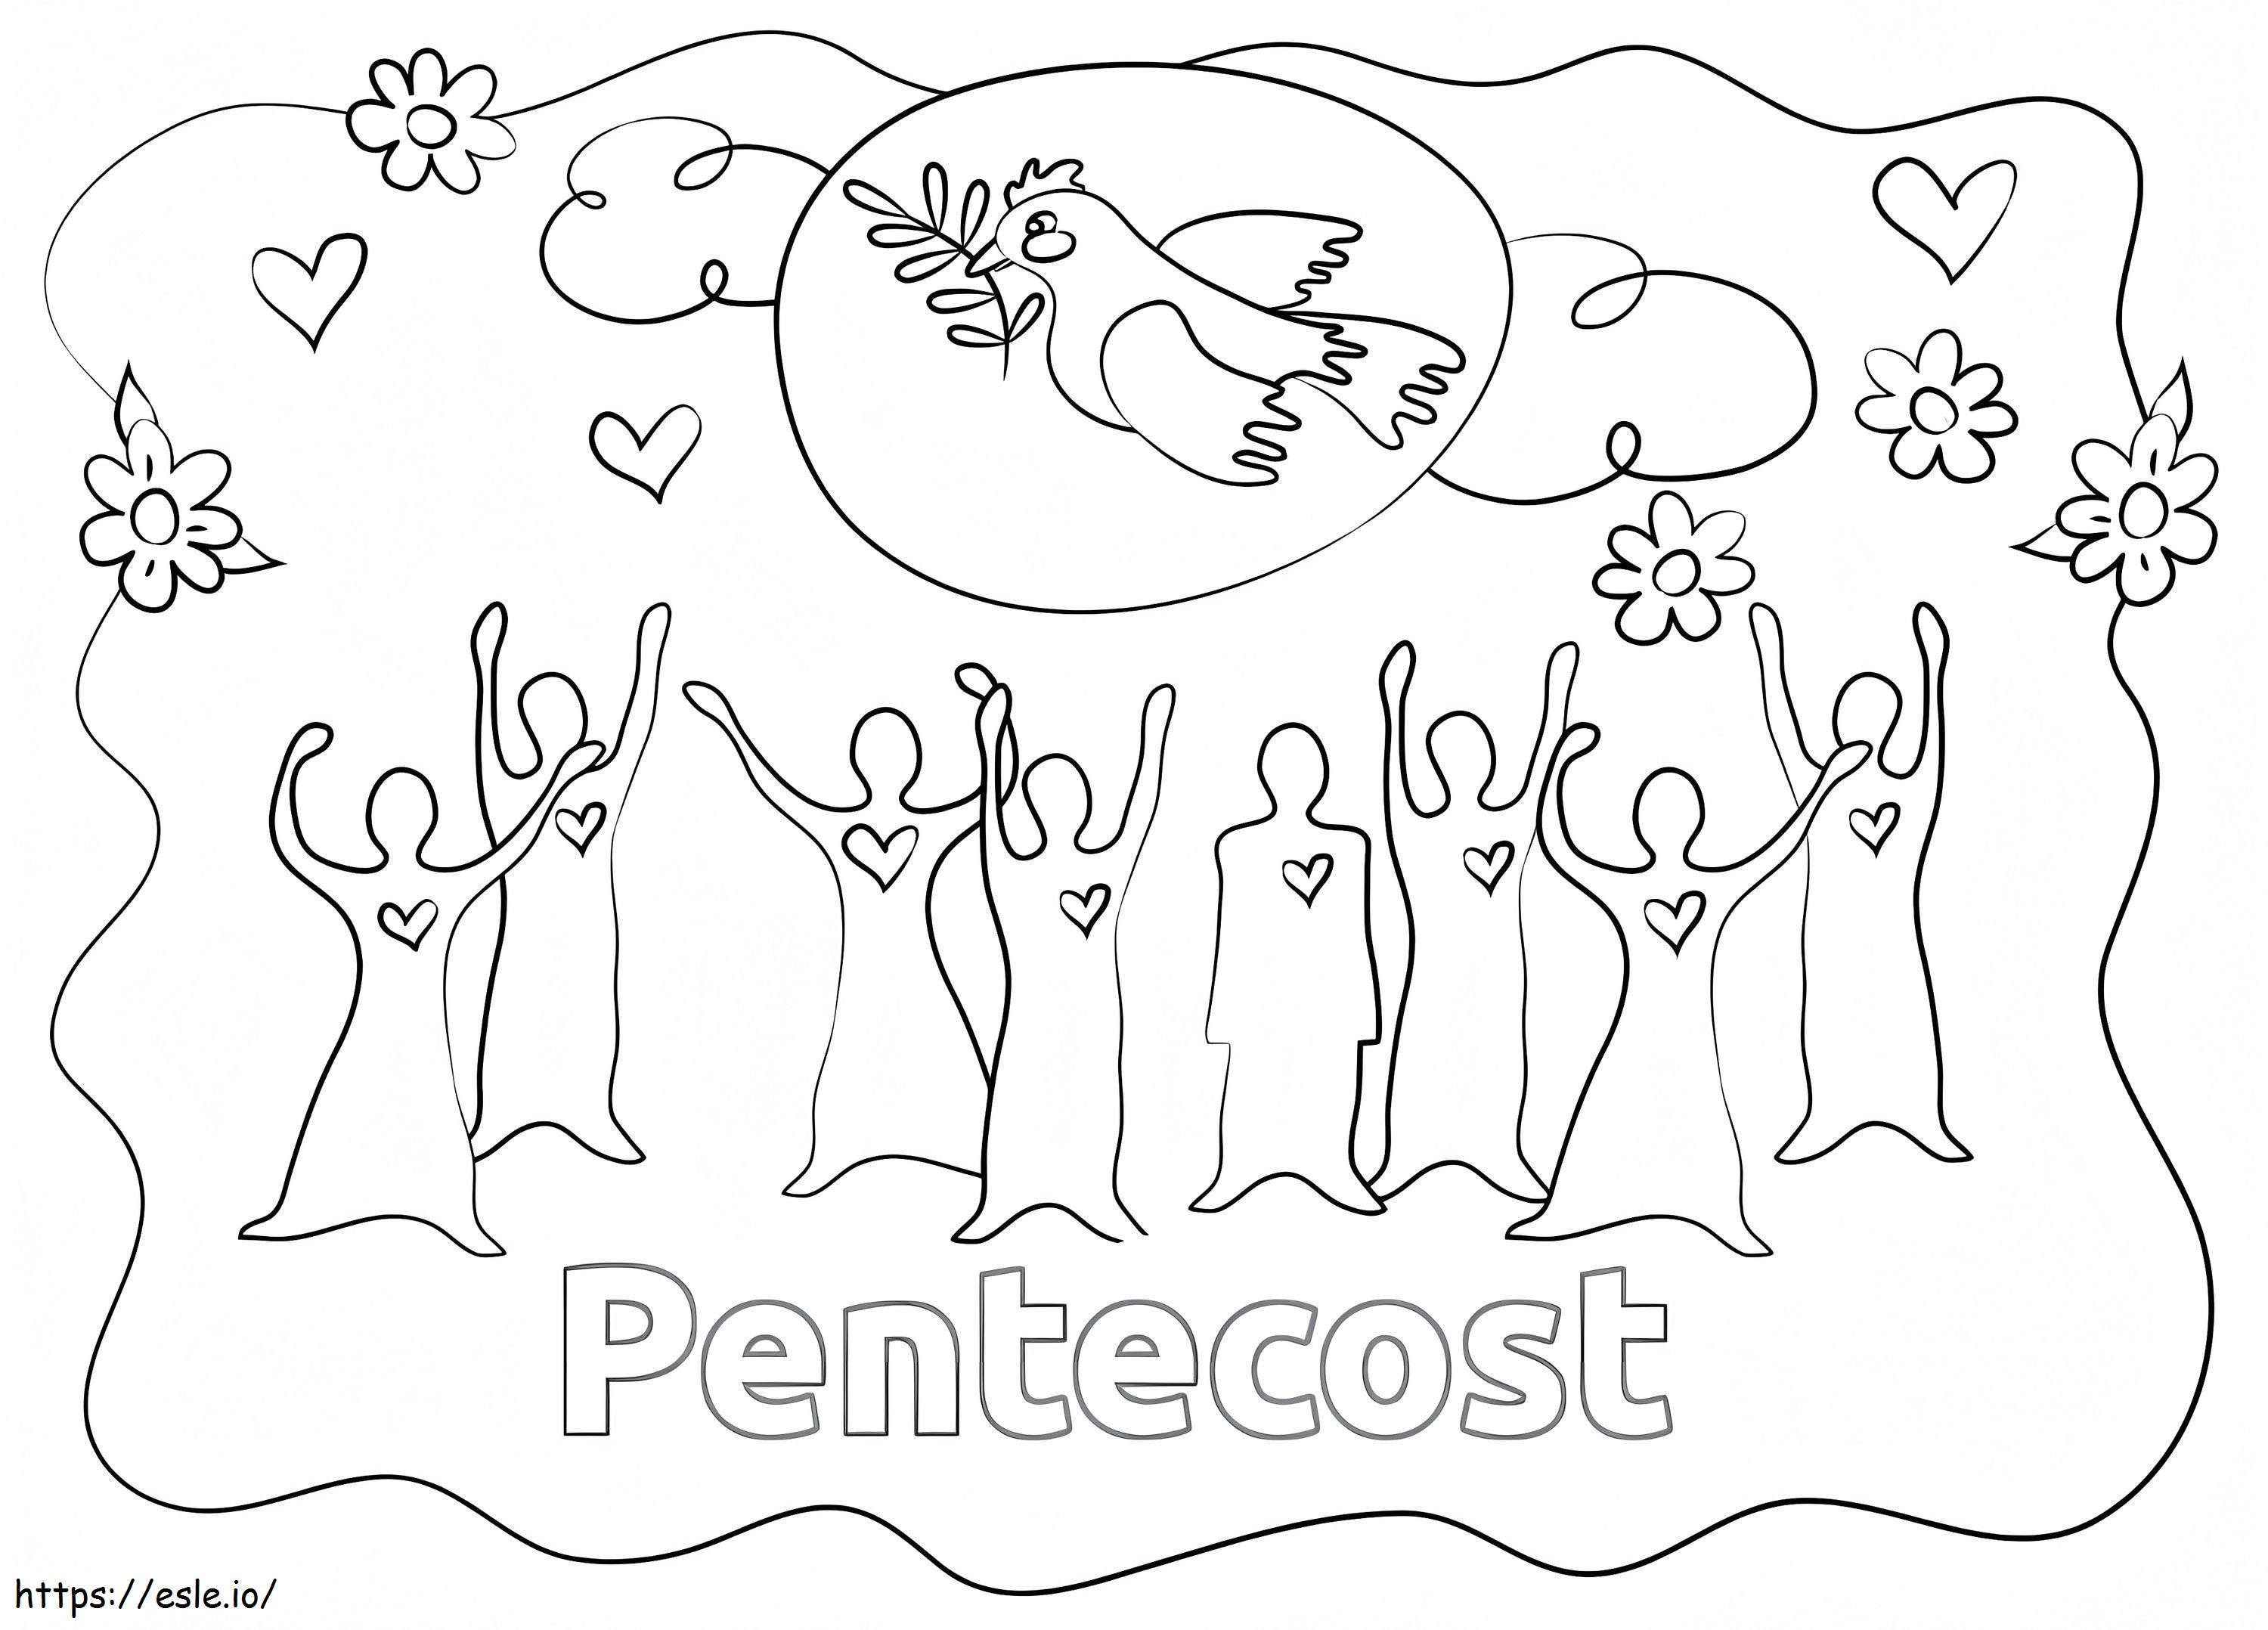 Pentecost 16 coloring page